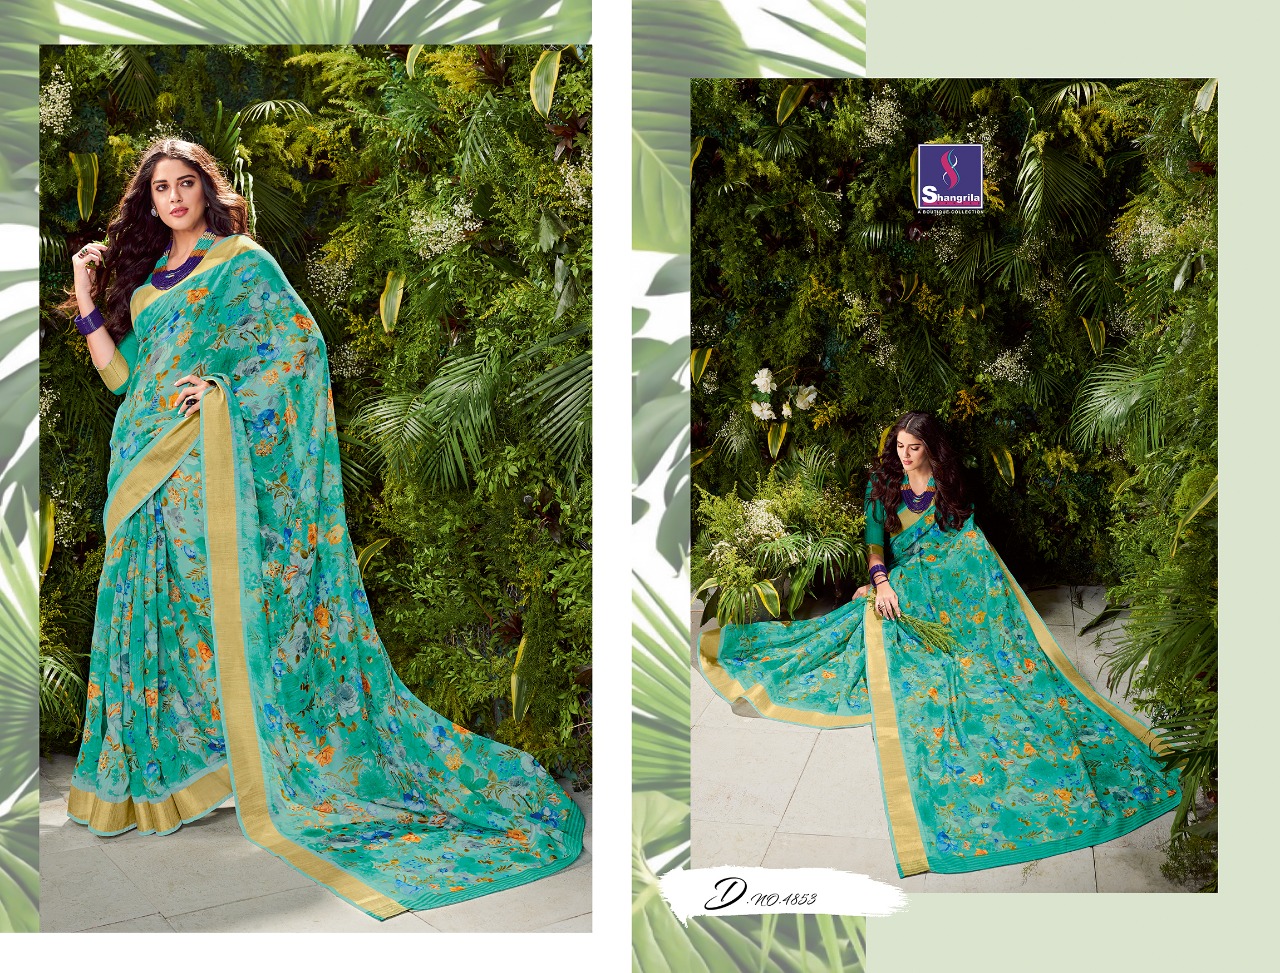 shangrila shakshi cotton vol 4 fancy collection of sarees at reasonable rate